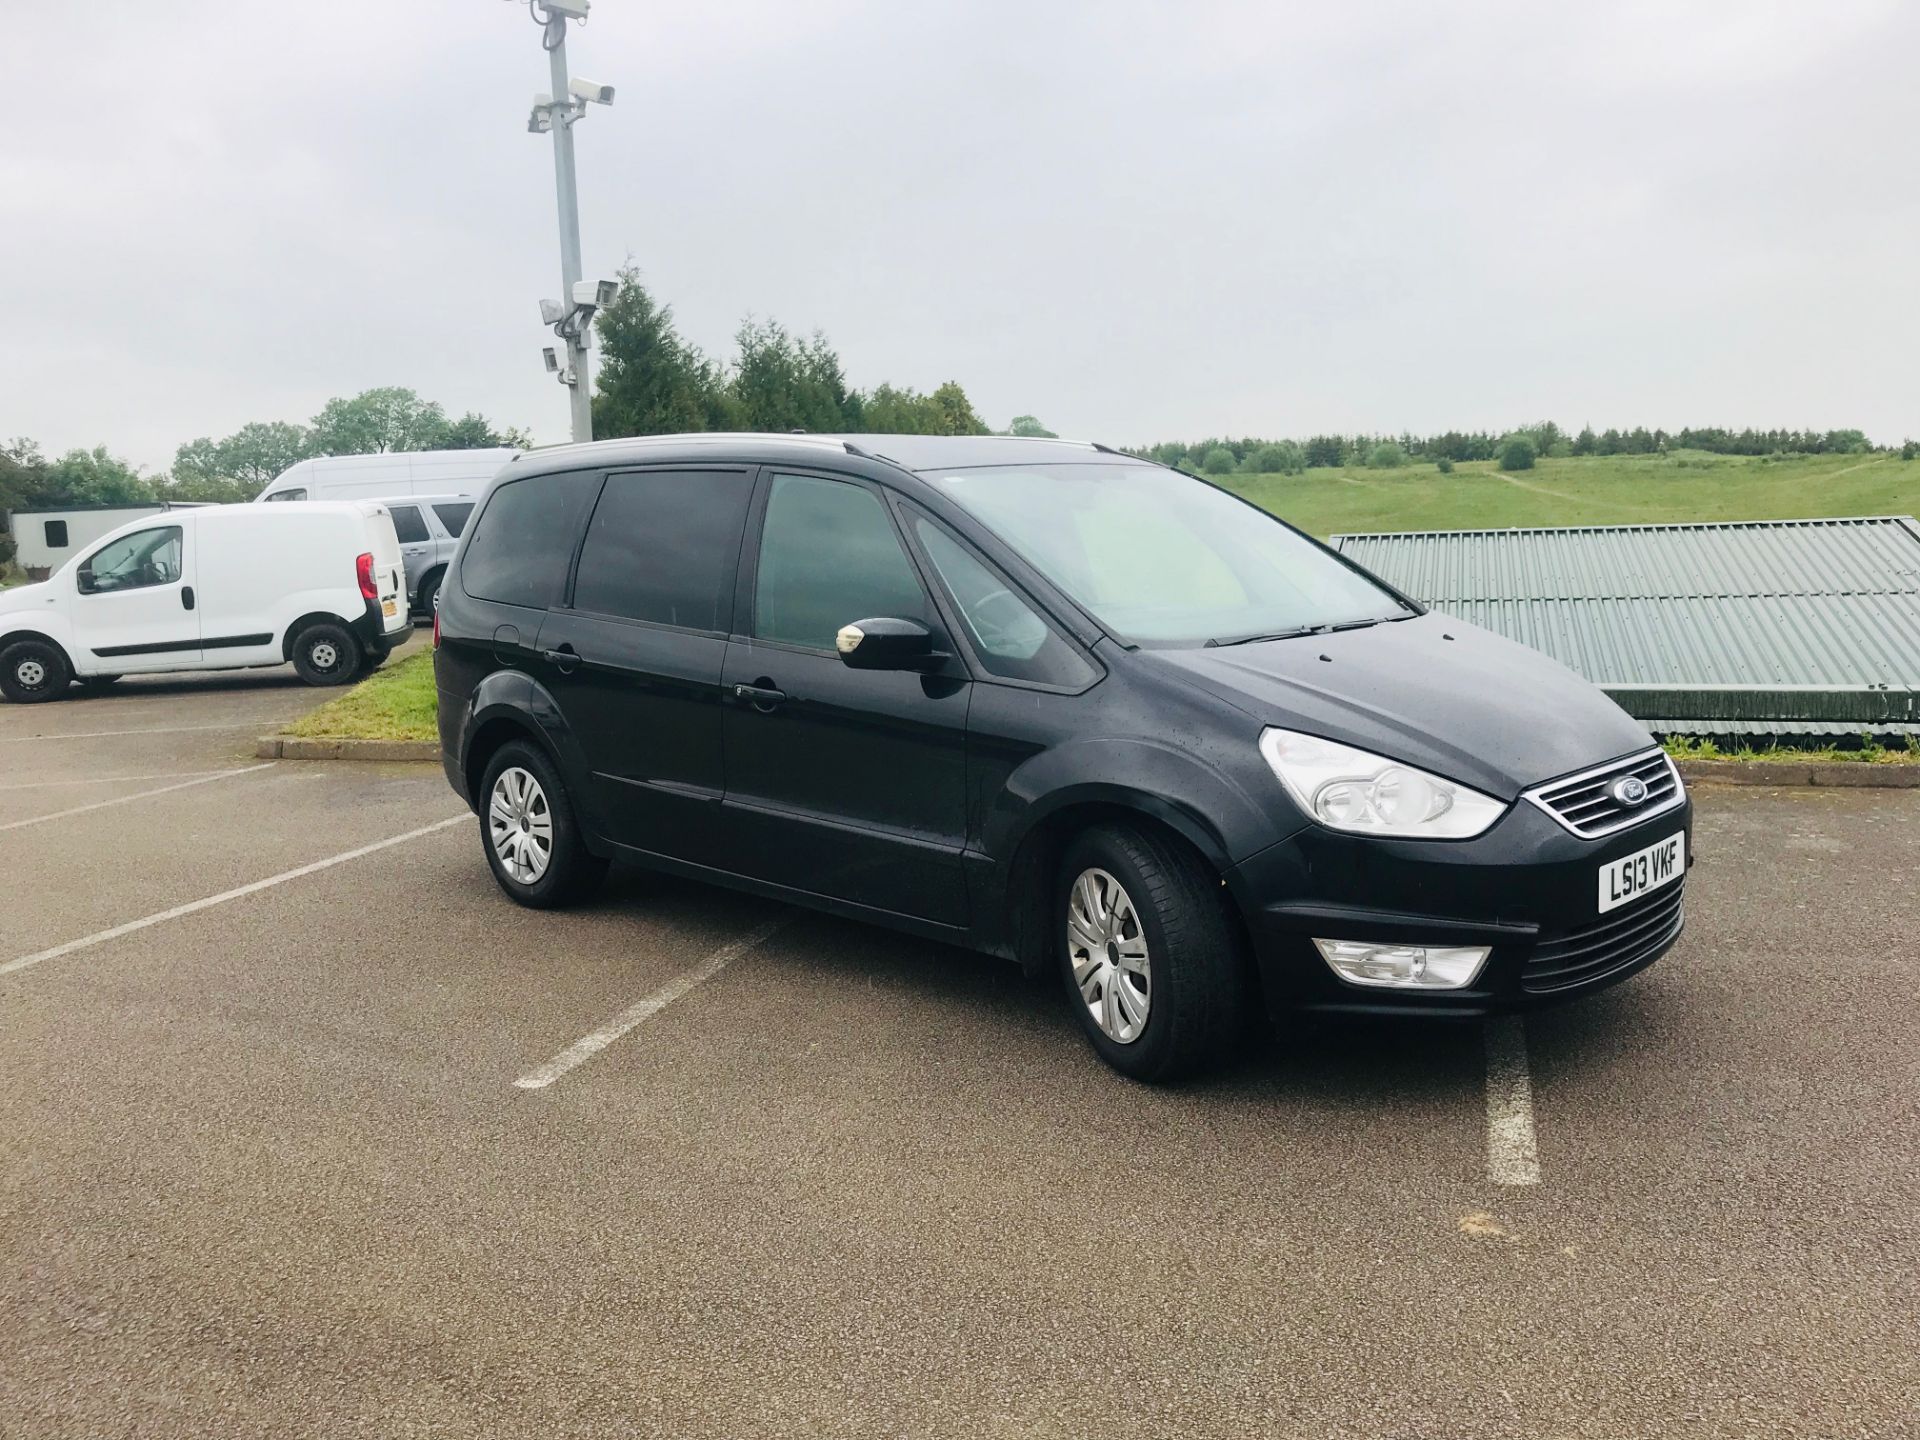 ON SALE FORD GALAXY 2.0TDCI POWER SHIFT "ZETEC" 7 SEATER (13 REG) AIR CON - ELEC PACK - AUTOMATIC - Image 2 of 14